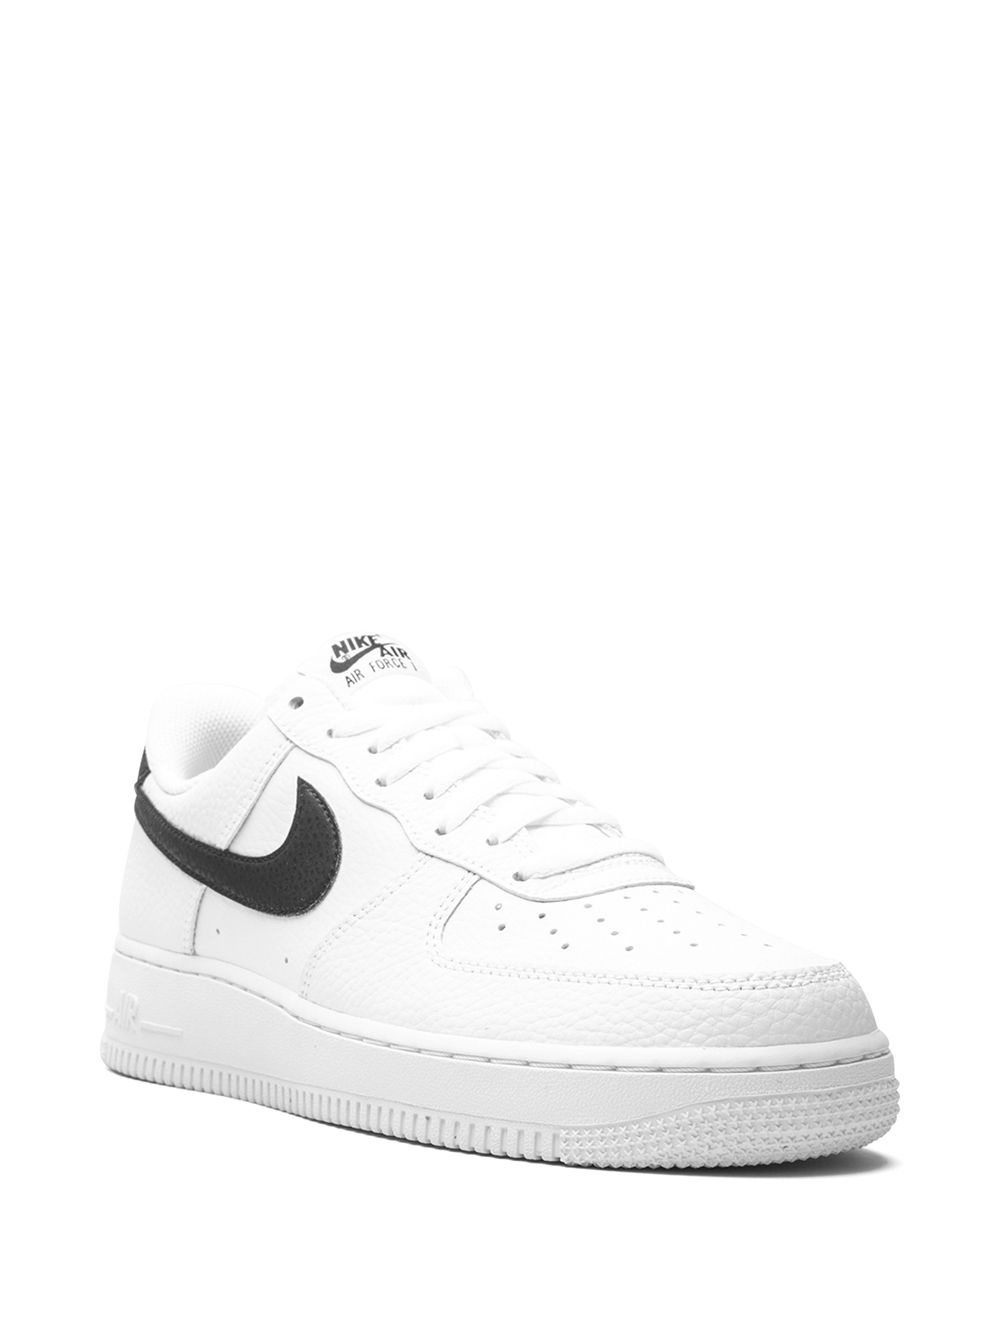 Air Force 1 Low '07 "White/Black" sneakers - 2